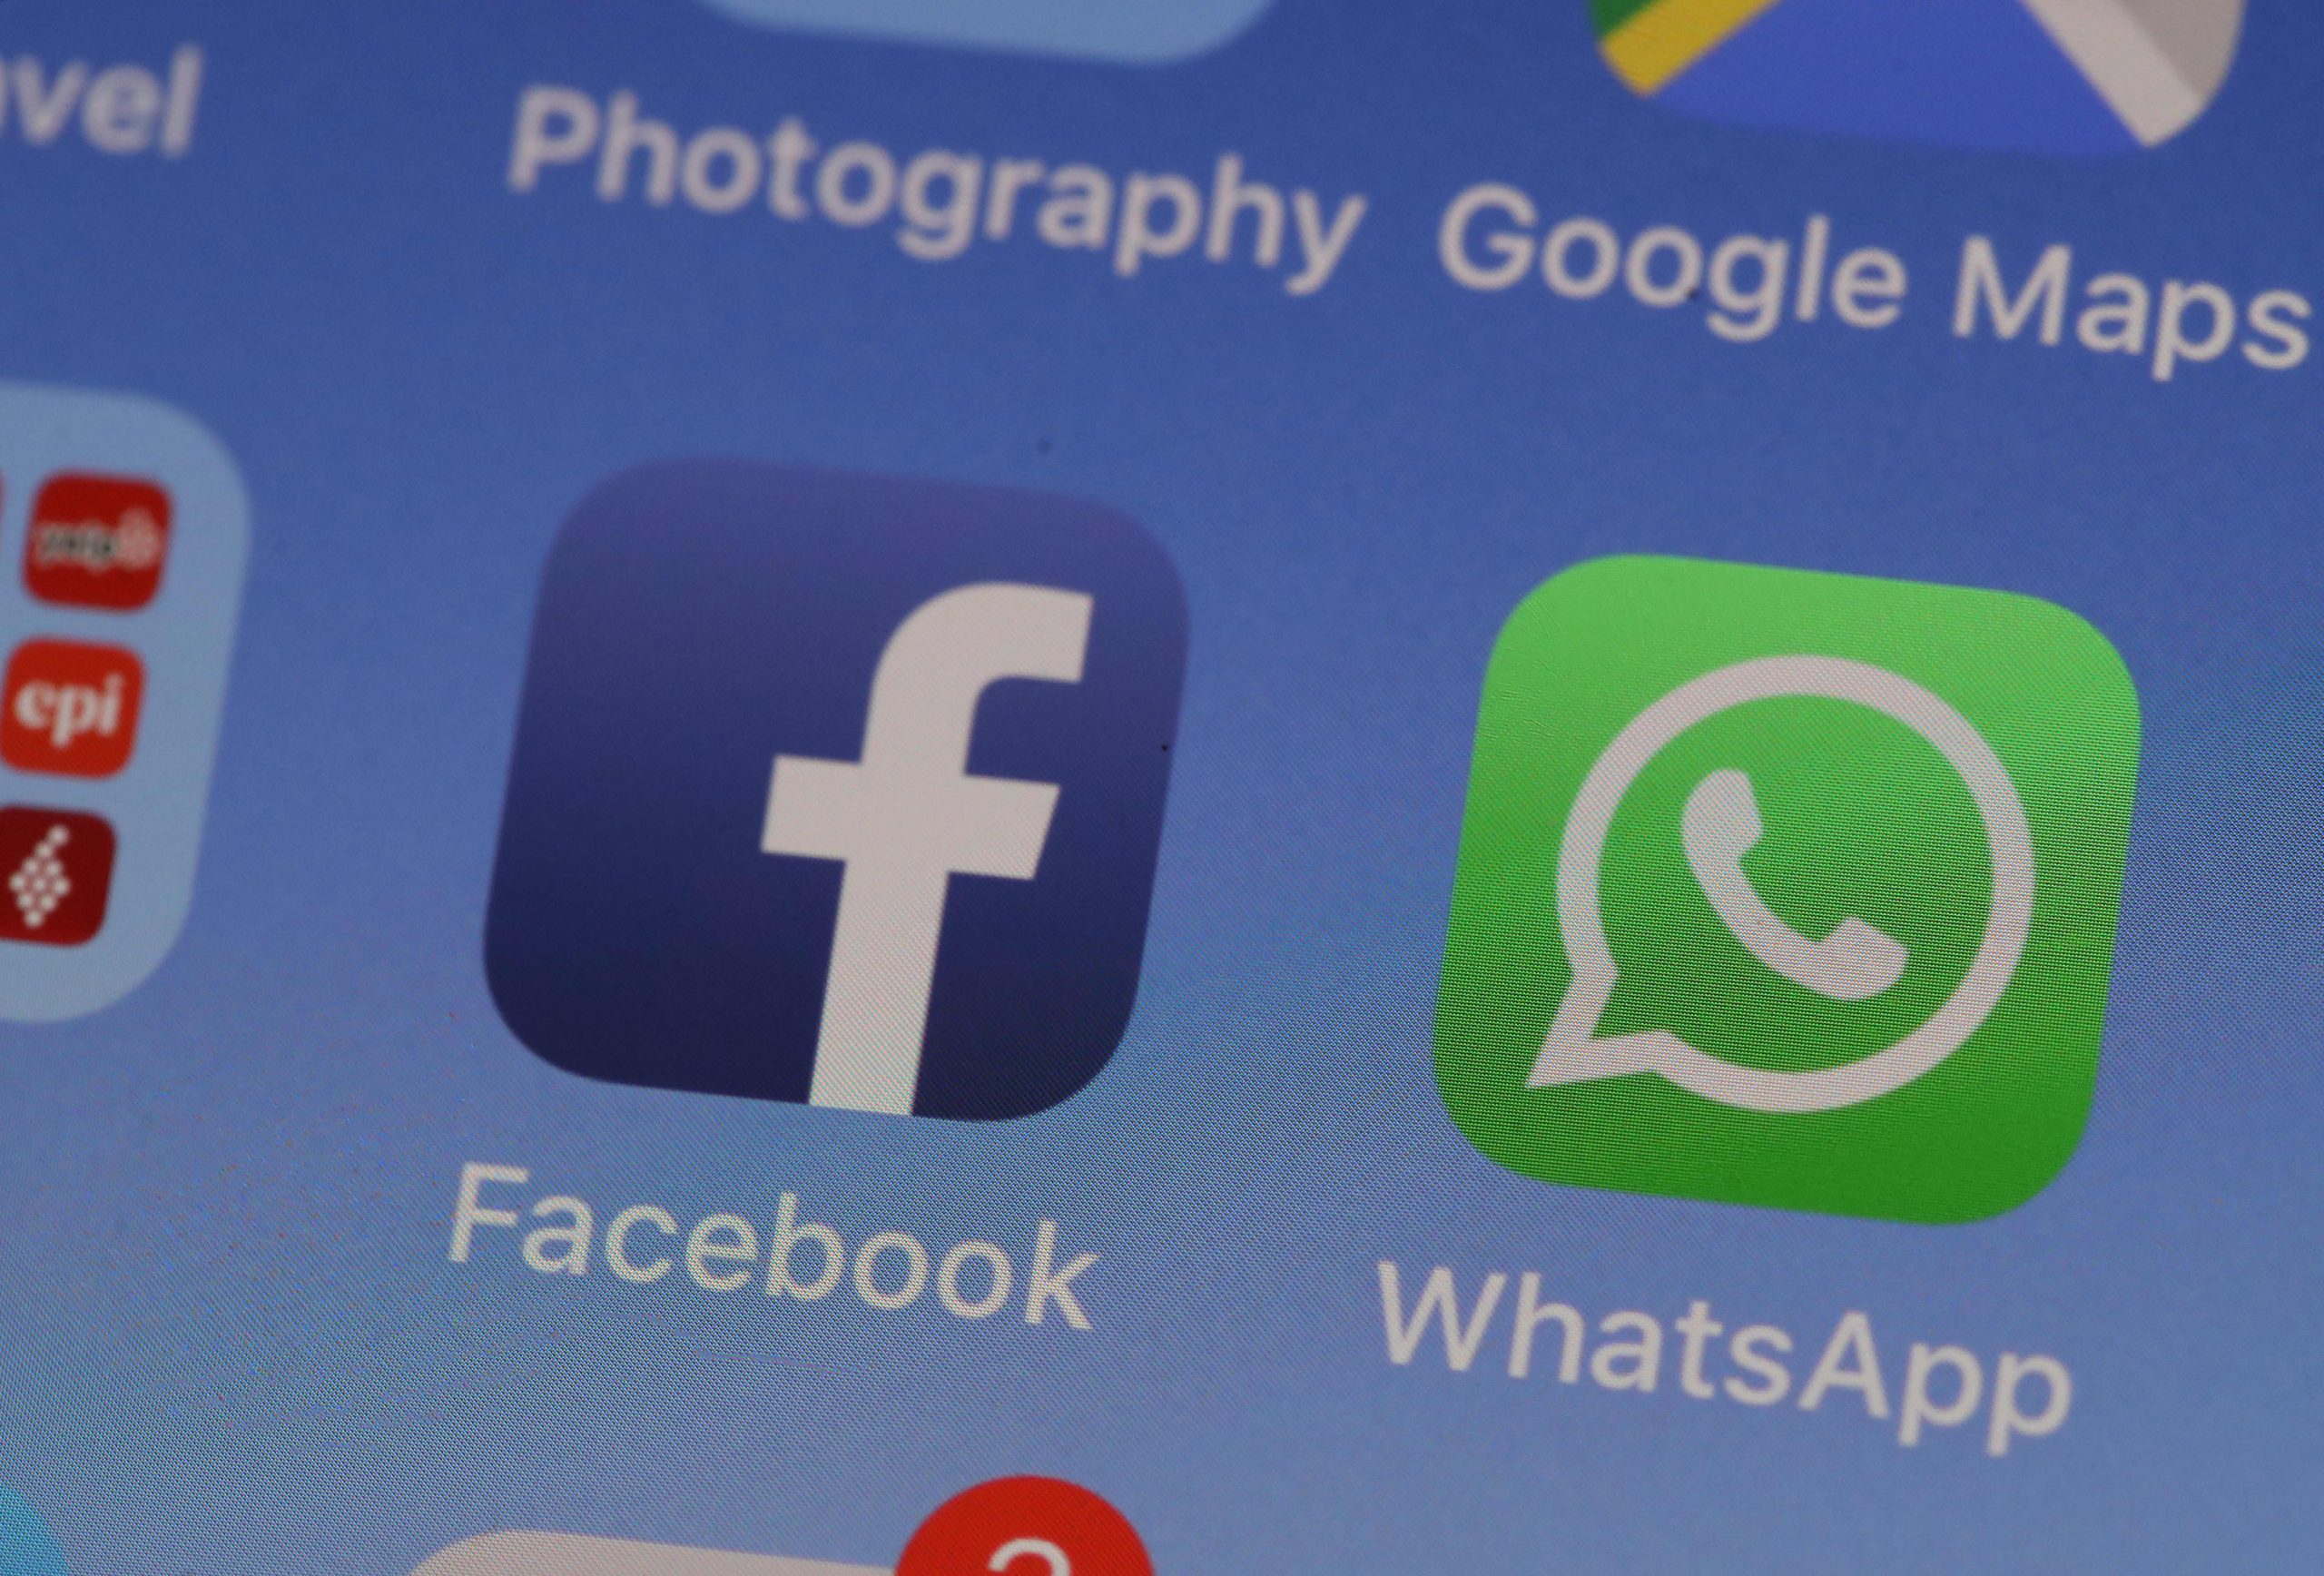 India ministry reportedly asked WhatsApp to drop privacy policy changes that sparked backlash